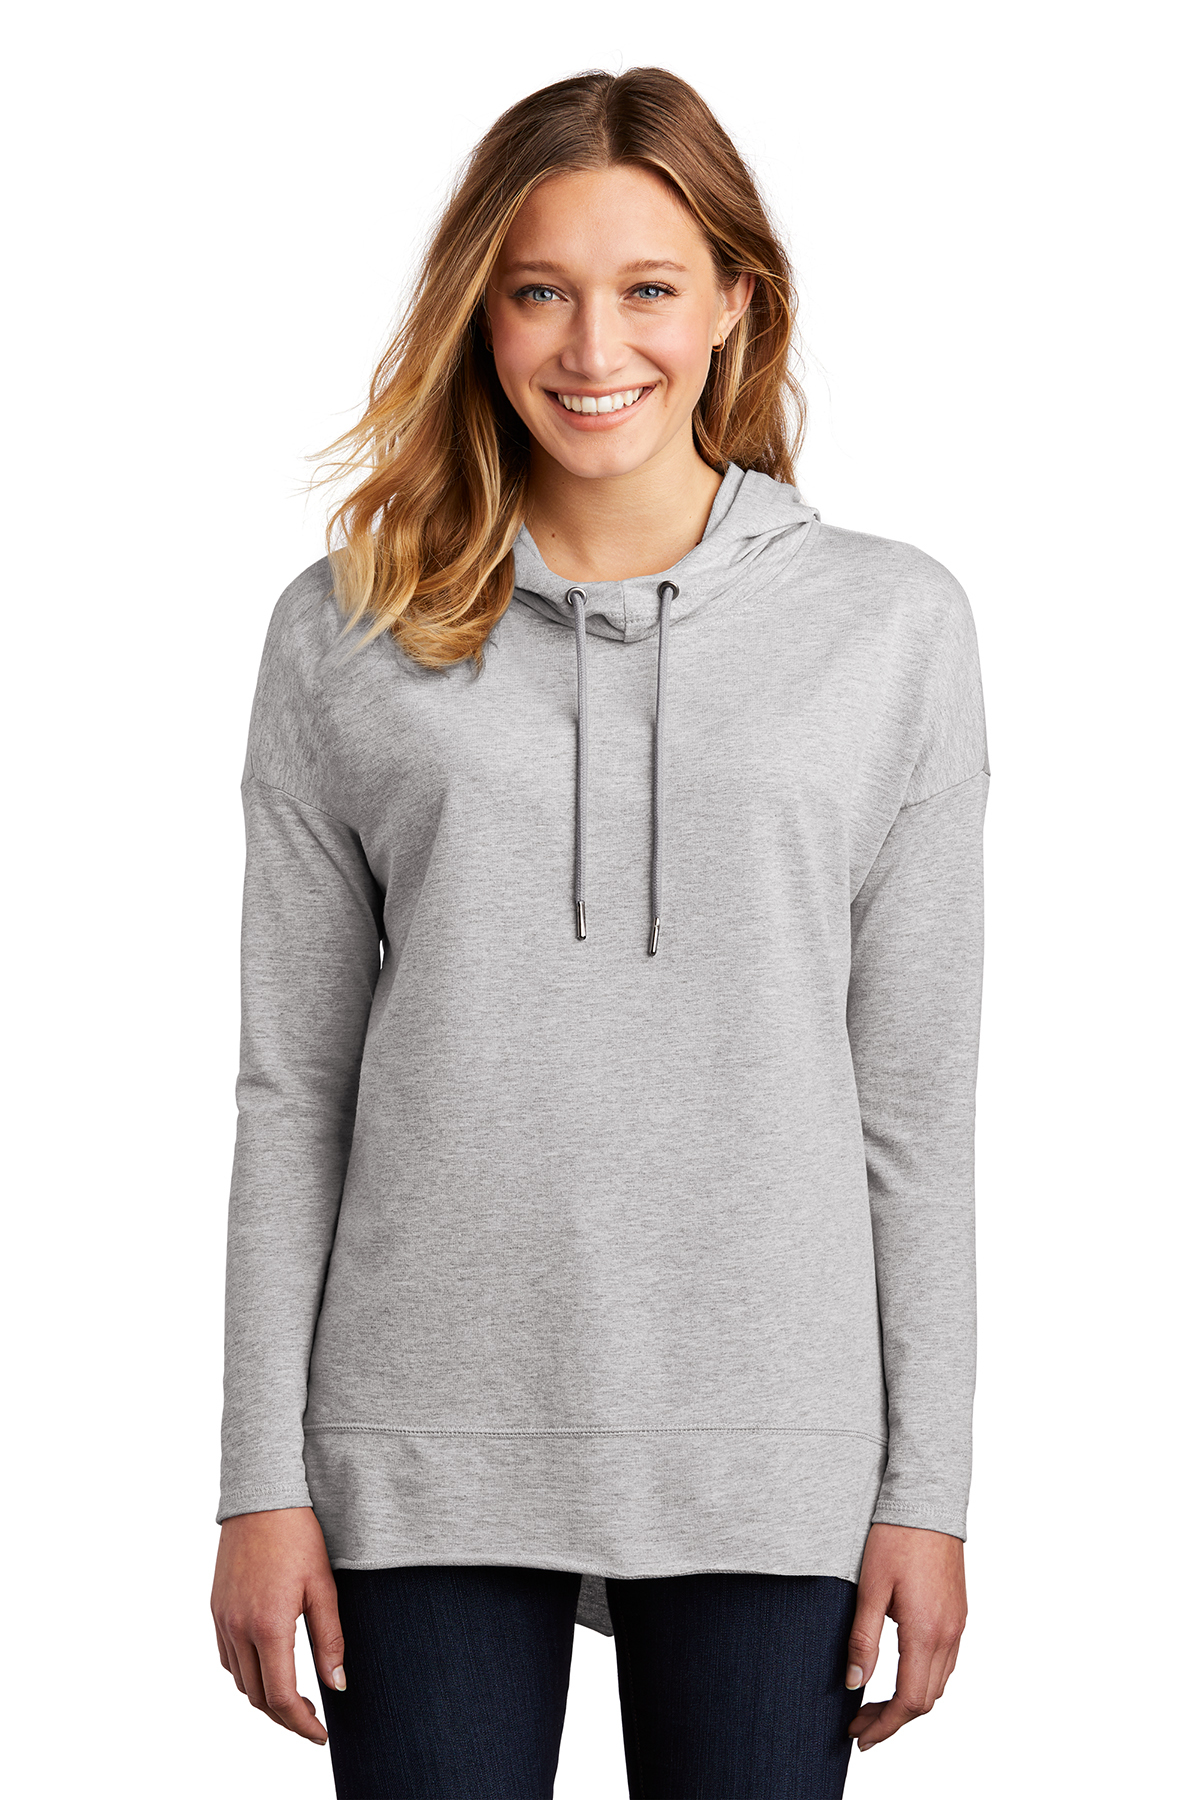 District DT671 - Women's Featherweight French Terry Hoodie